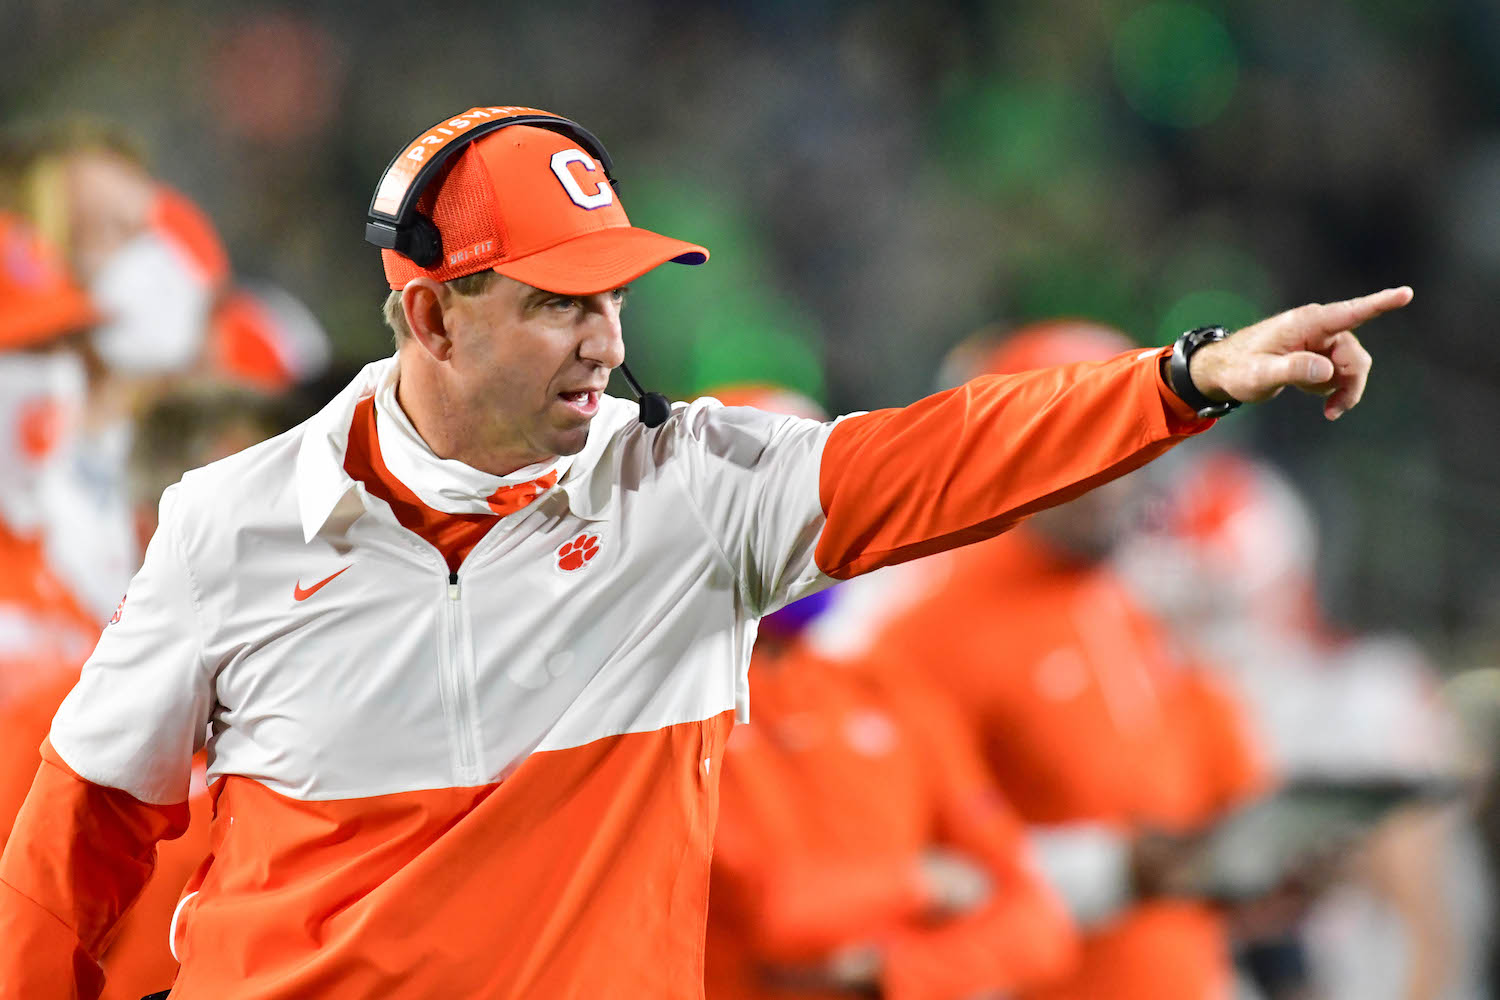 Angry Dabo Swinney Blasts FSU Officials for ‘Forfeiting the Game’; Seminoles Coach Responds